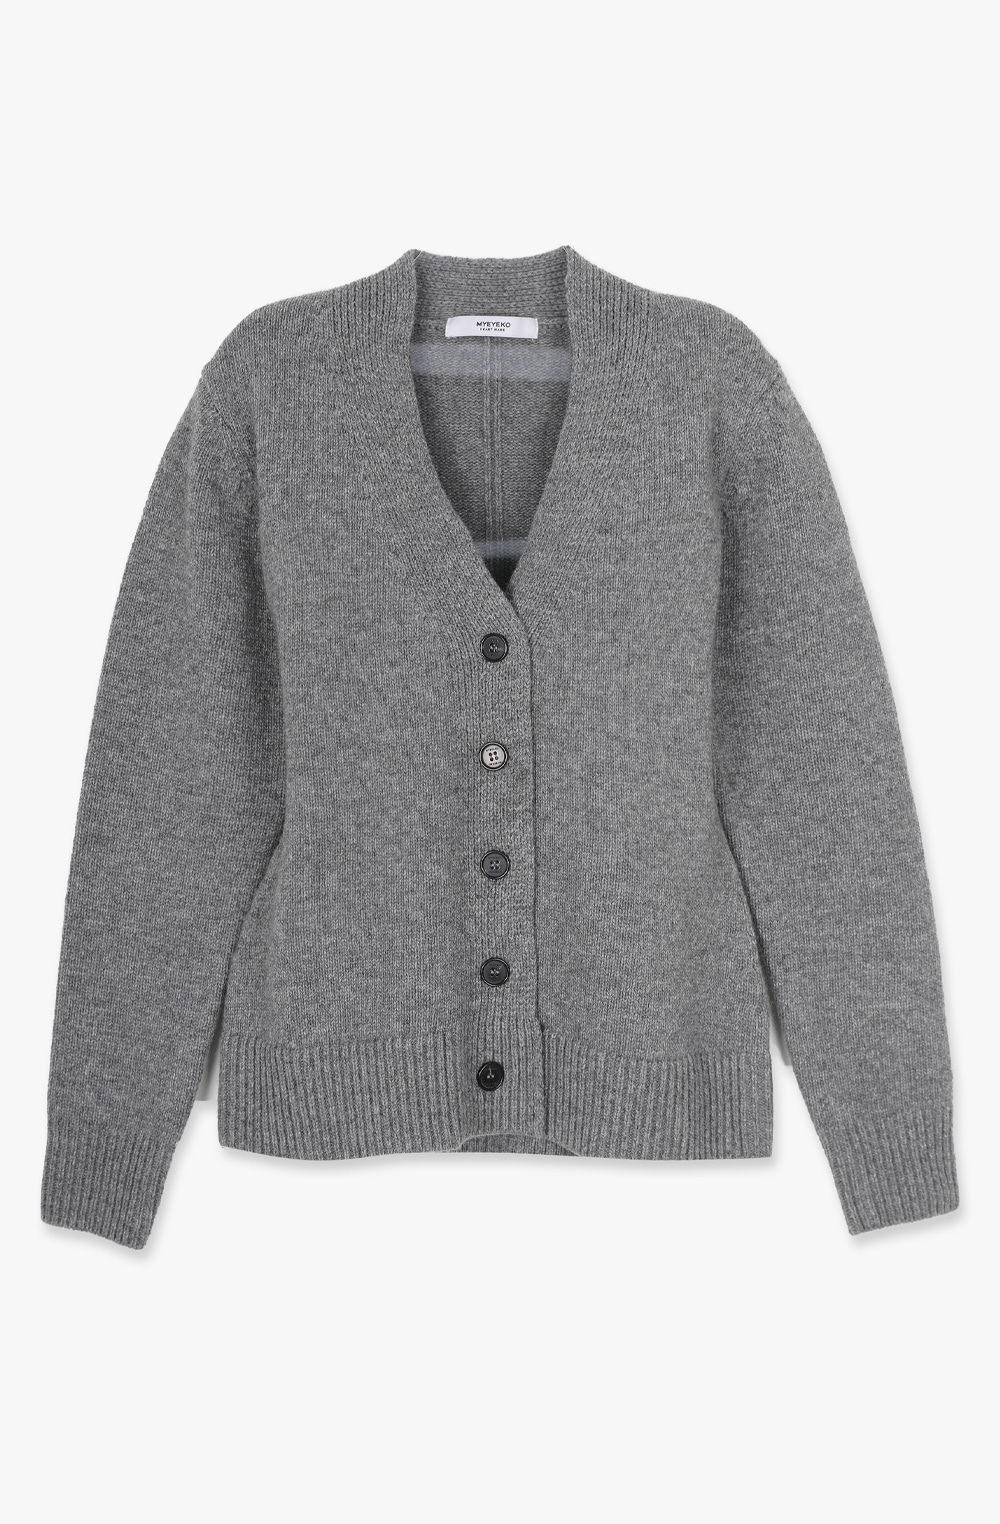 HIGH QUALITY LINE - Bailey Hourglass Knit Cardigan (CHARCOAL GRAY)